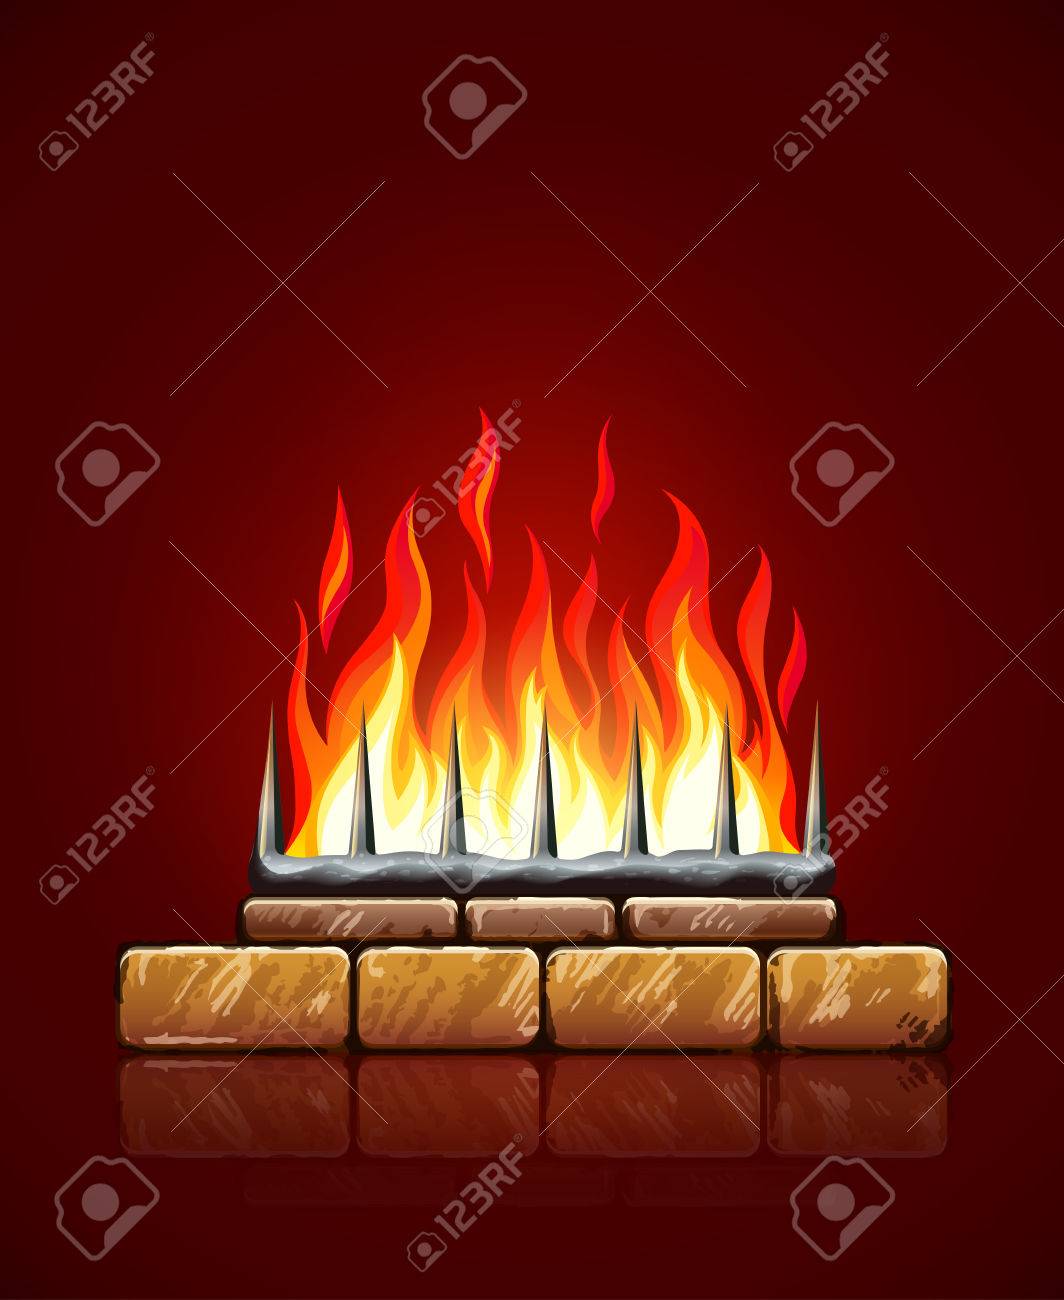 Burning Flames Of Hot Fire In Brick Stones Fireplace On Red